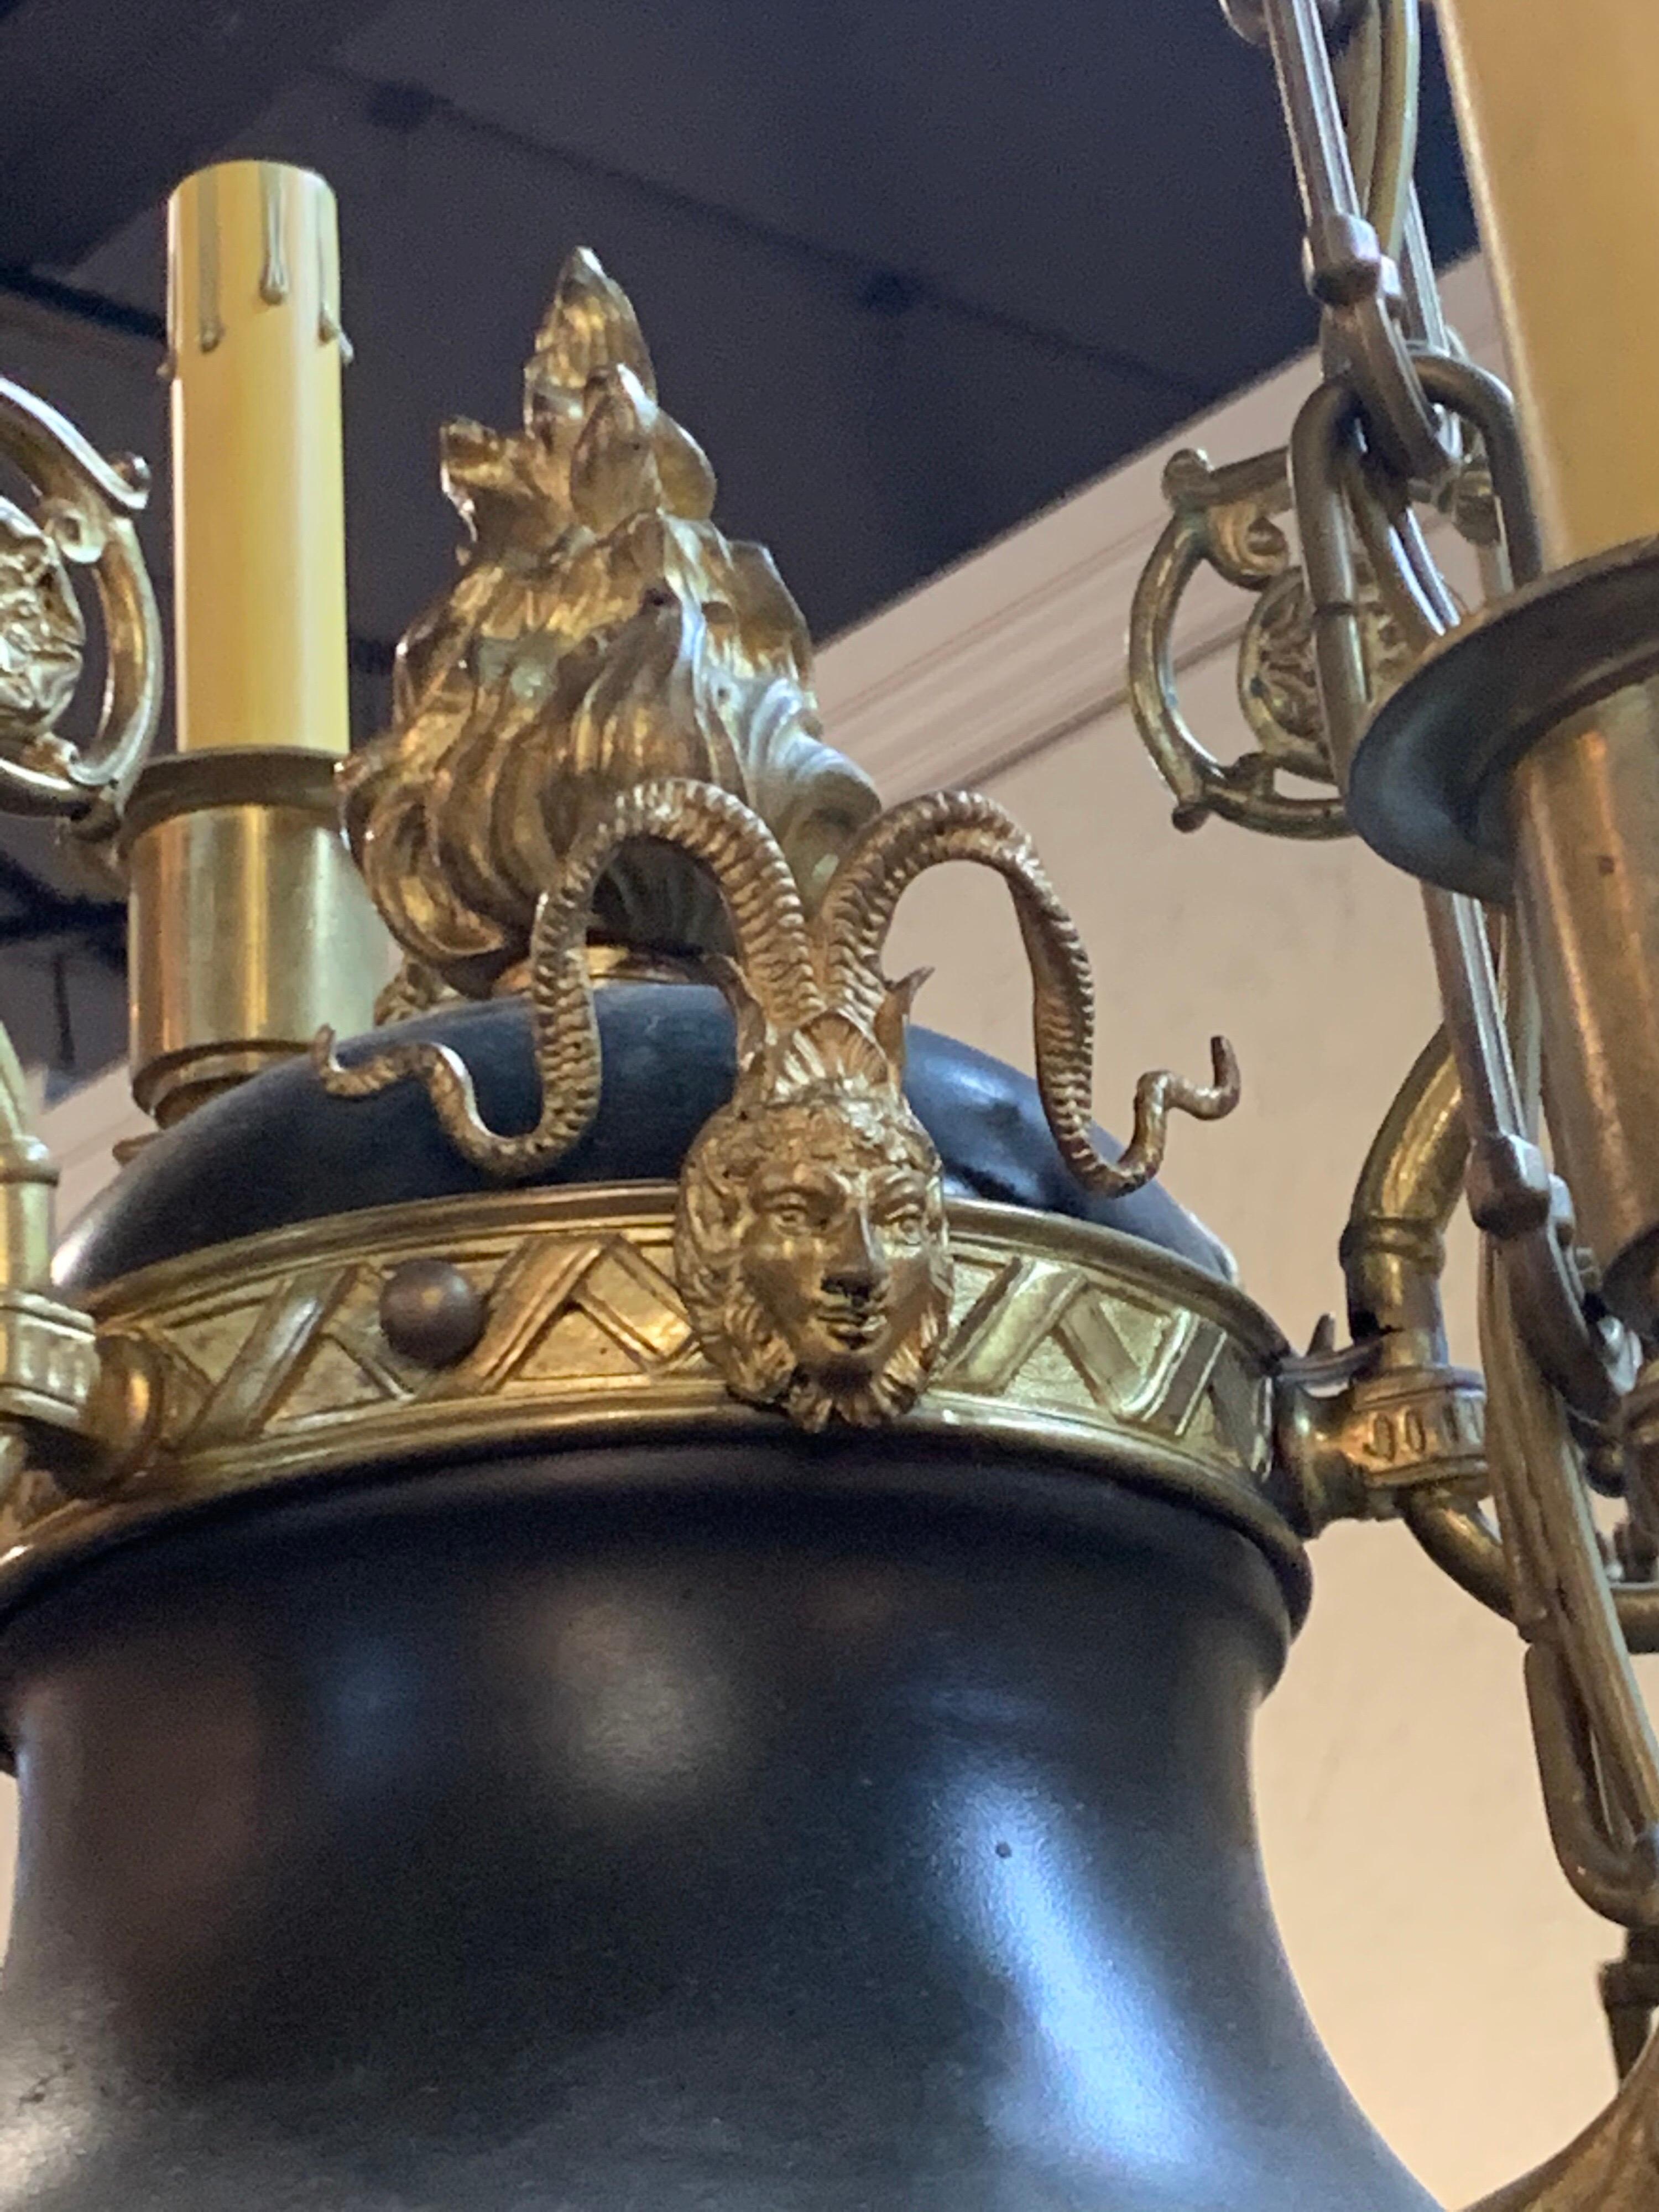 Exquisite 19th century French Empire style tole and bronze 12-light chandelier. Beautiful decorative details on the bronze, including lovely finials and faces on the arms and the top section. Exceptional quality!